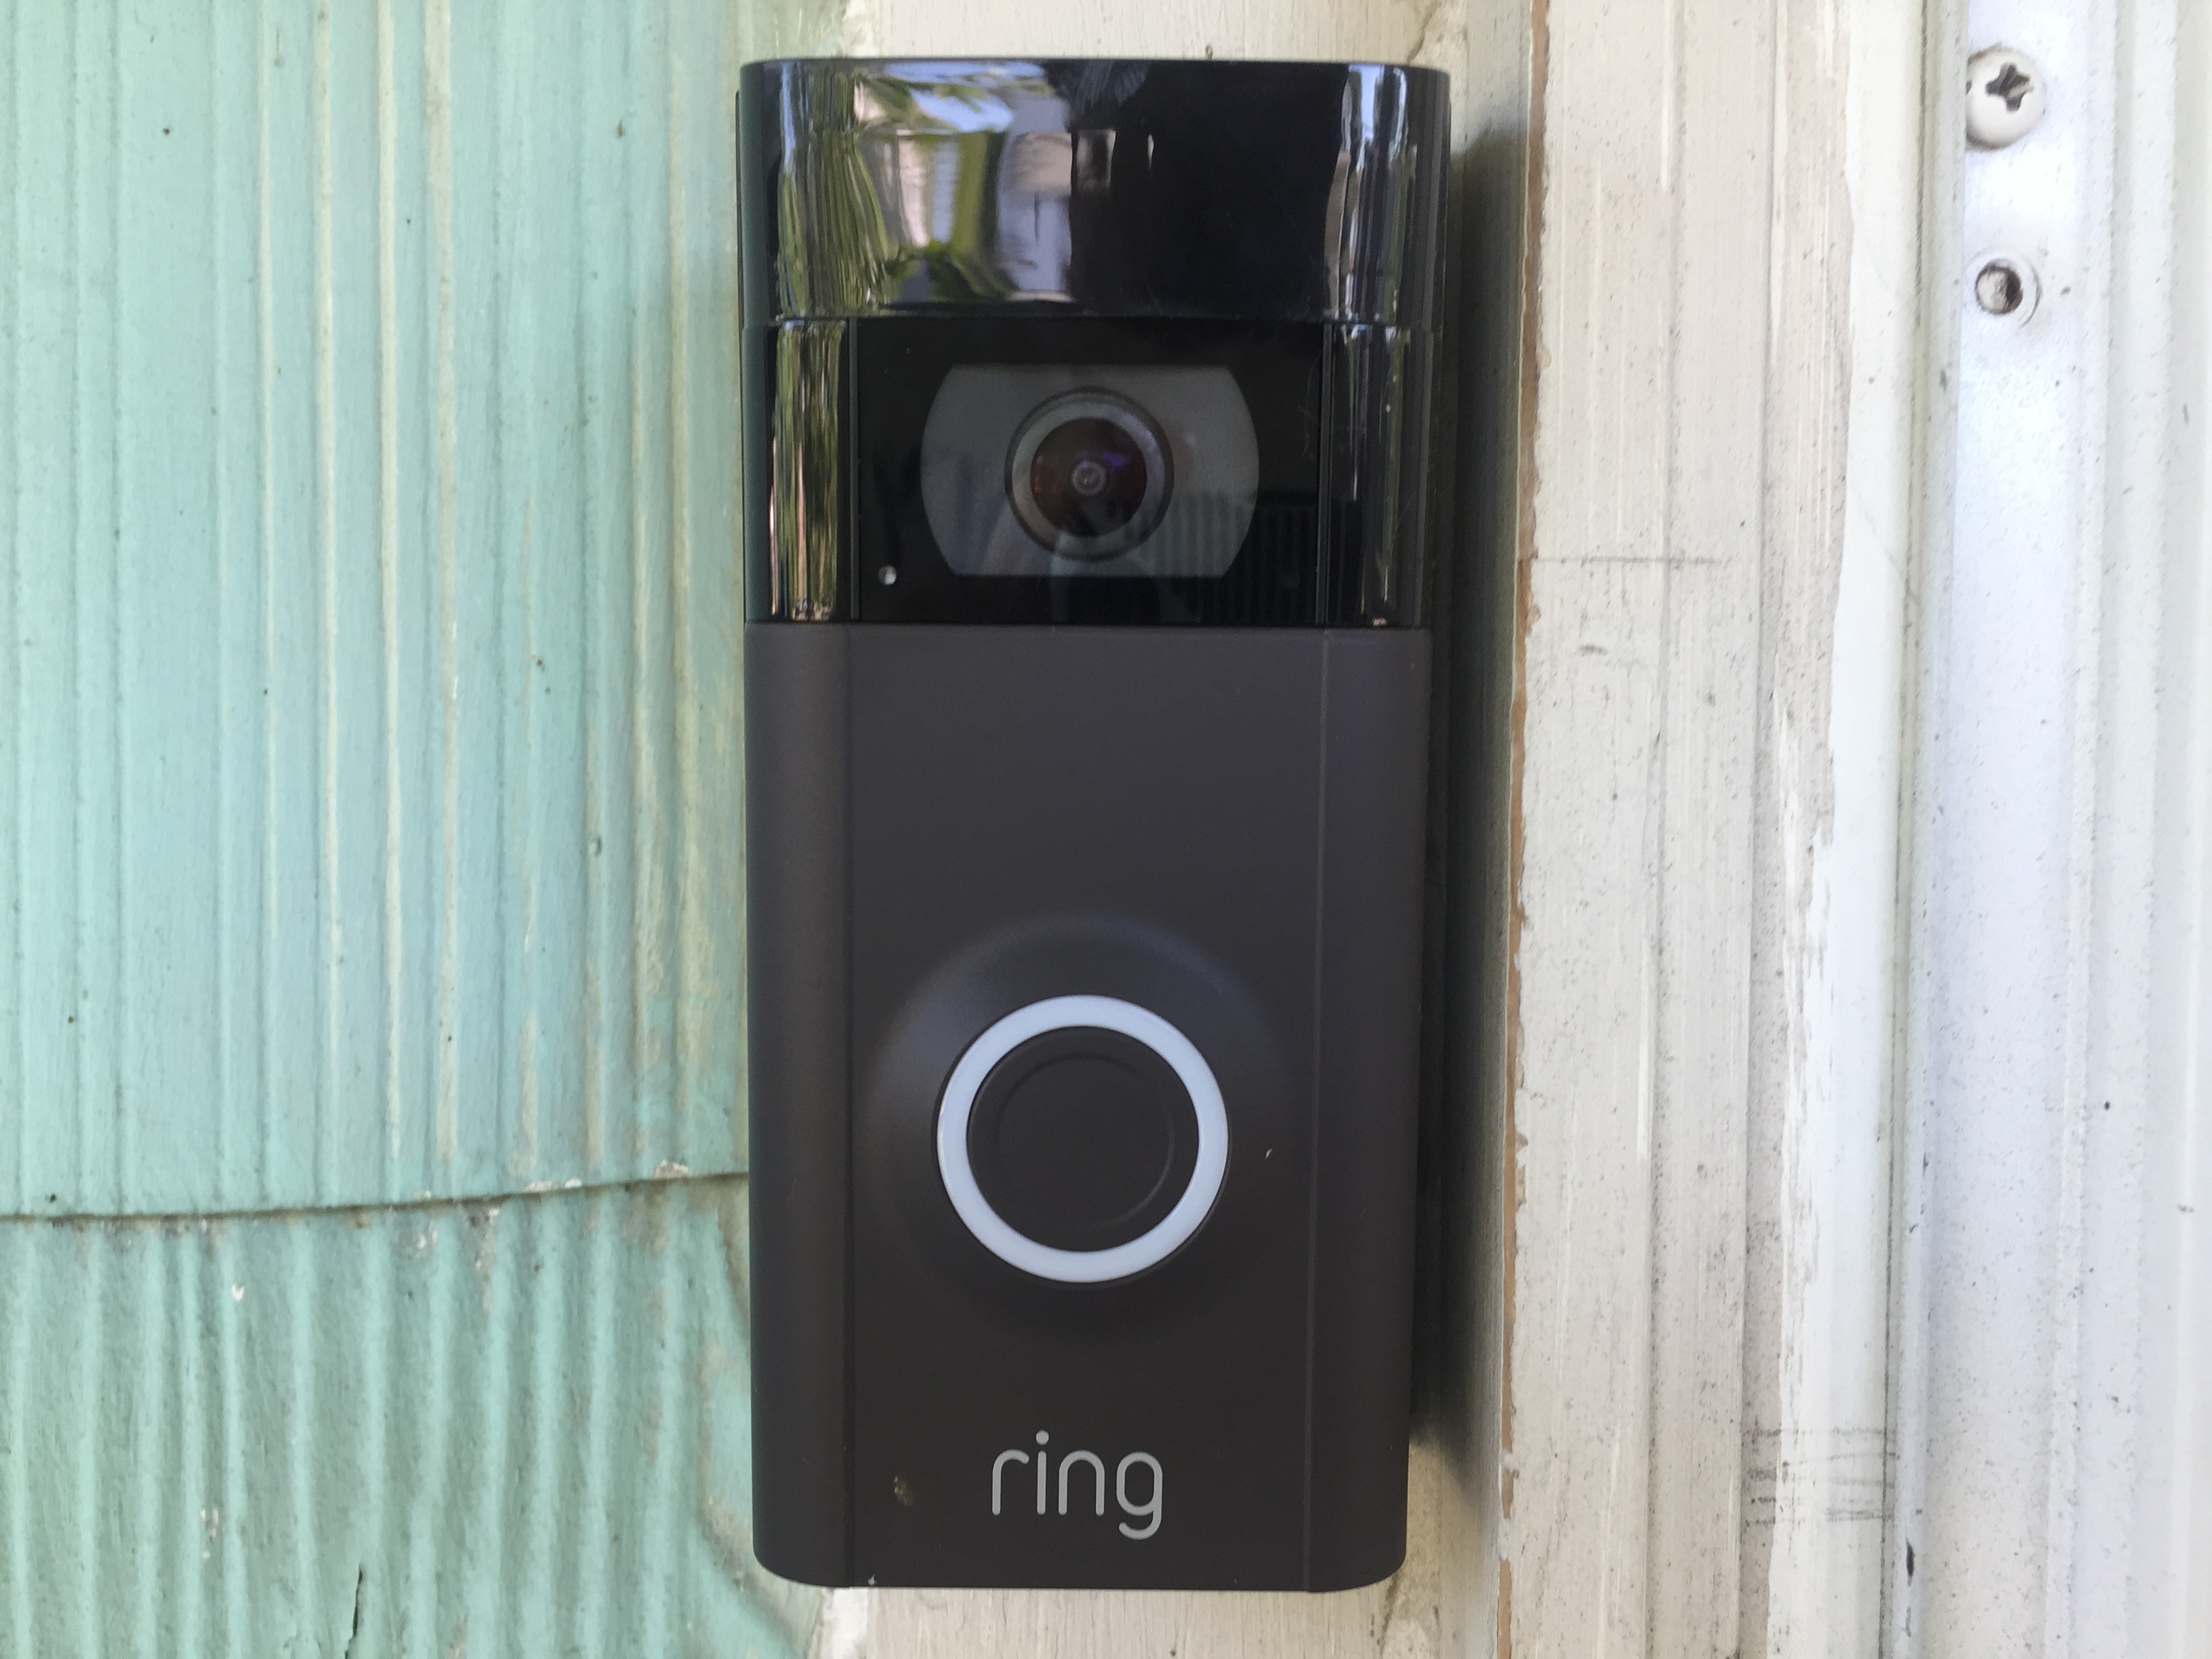 Police Offer  Ring for Free In Exchange for Access - The